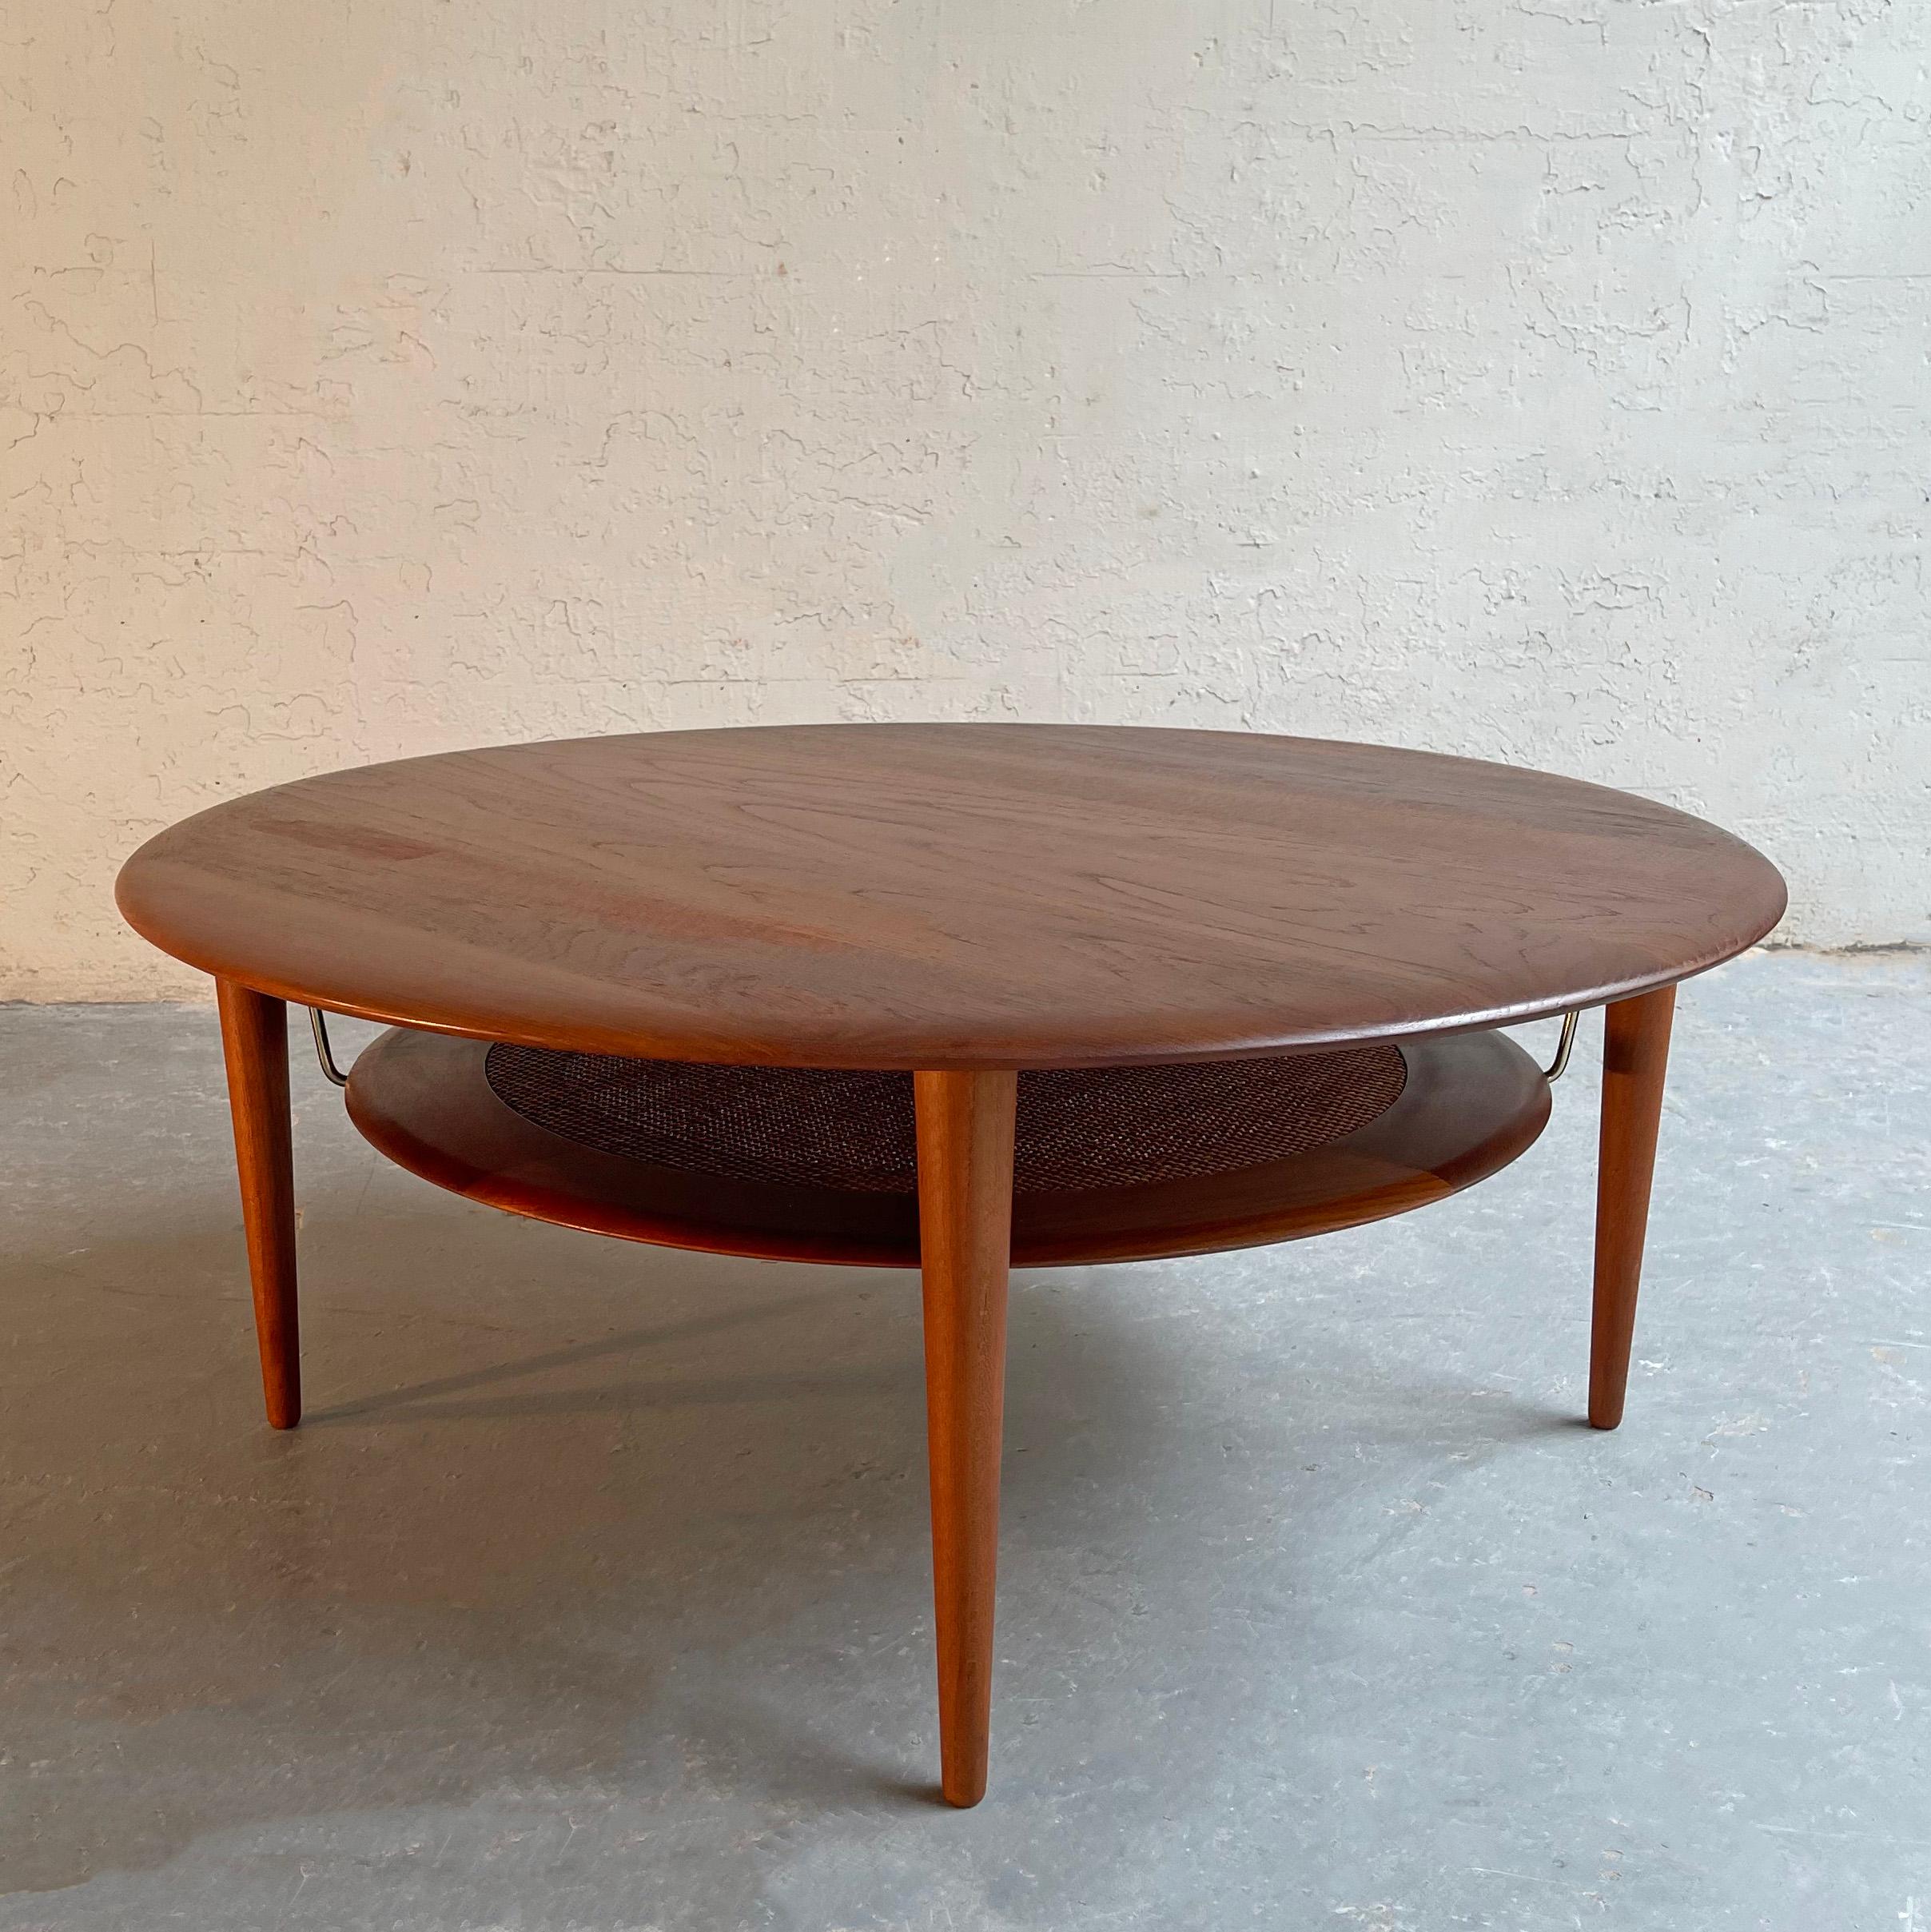 Danish modern, model 515, round, teak coffee table by Peter Hvidt and Orla Molgaard Nielsen for France & Søn/France & Daverkosen features a lower caned tier with brass braces.